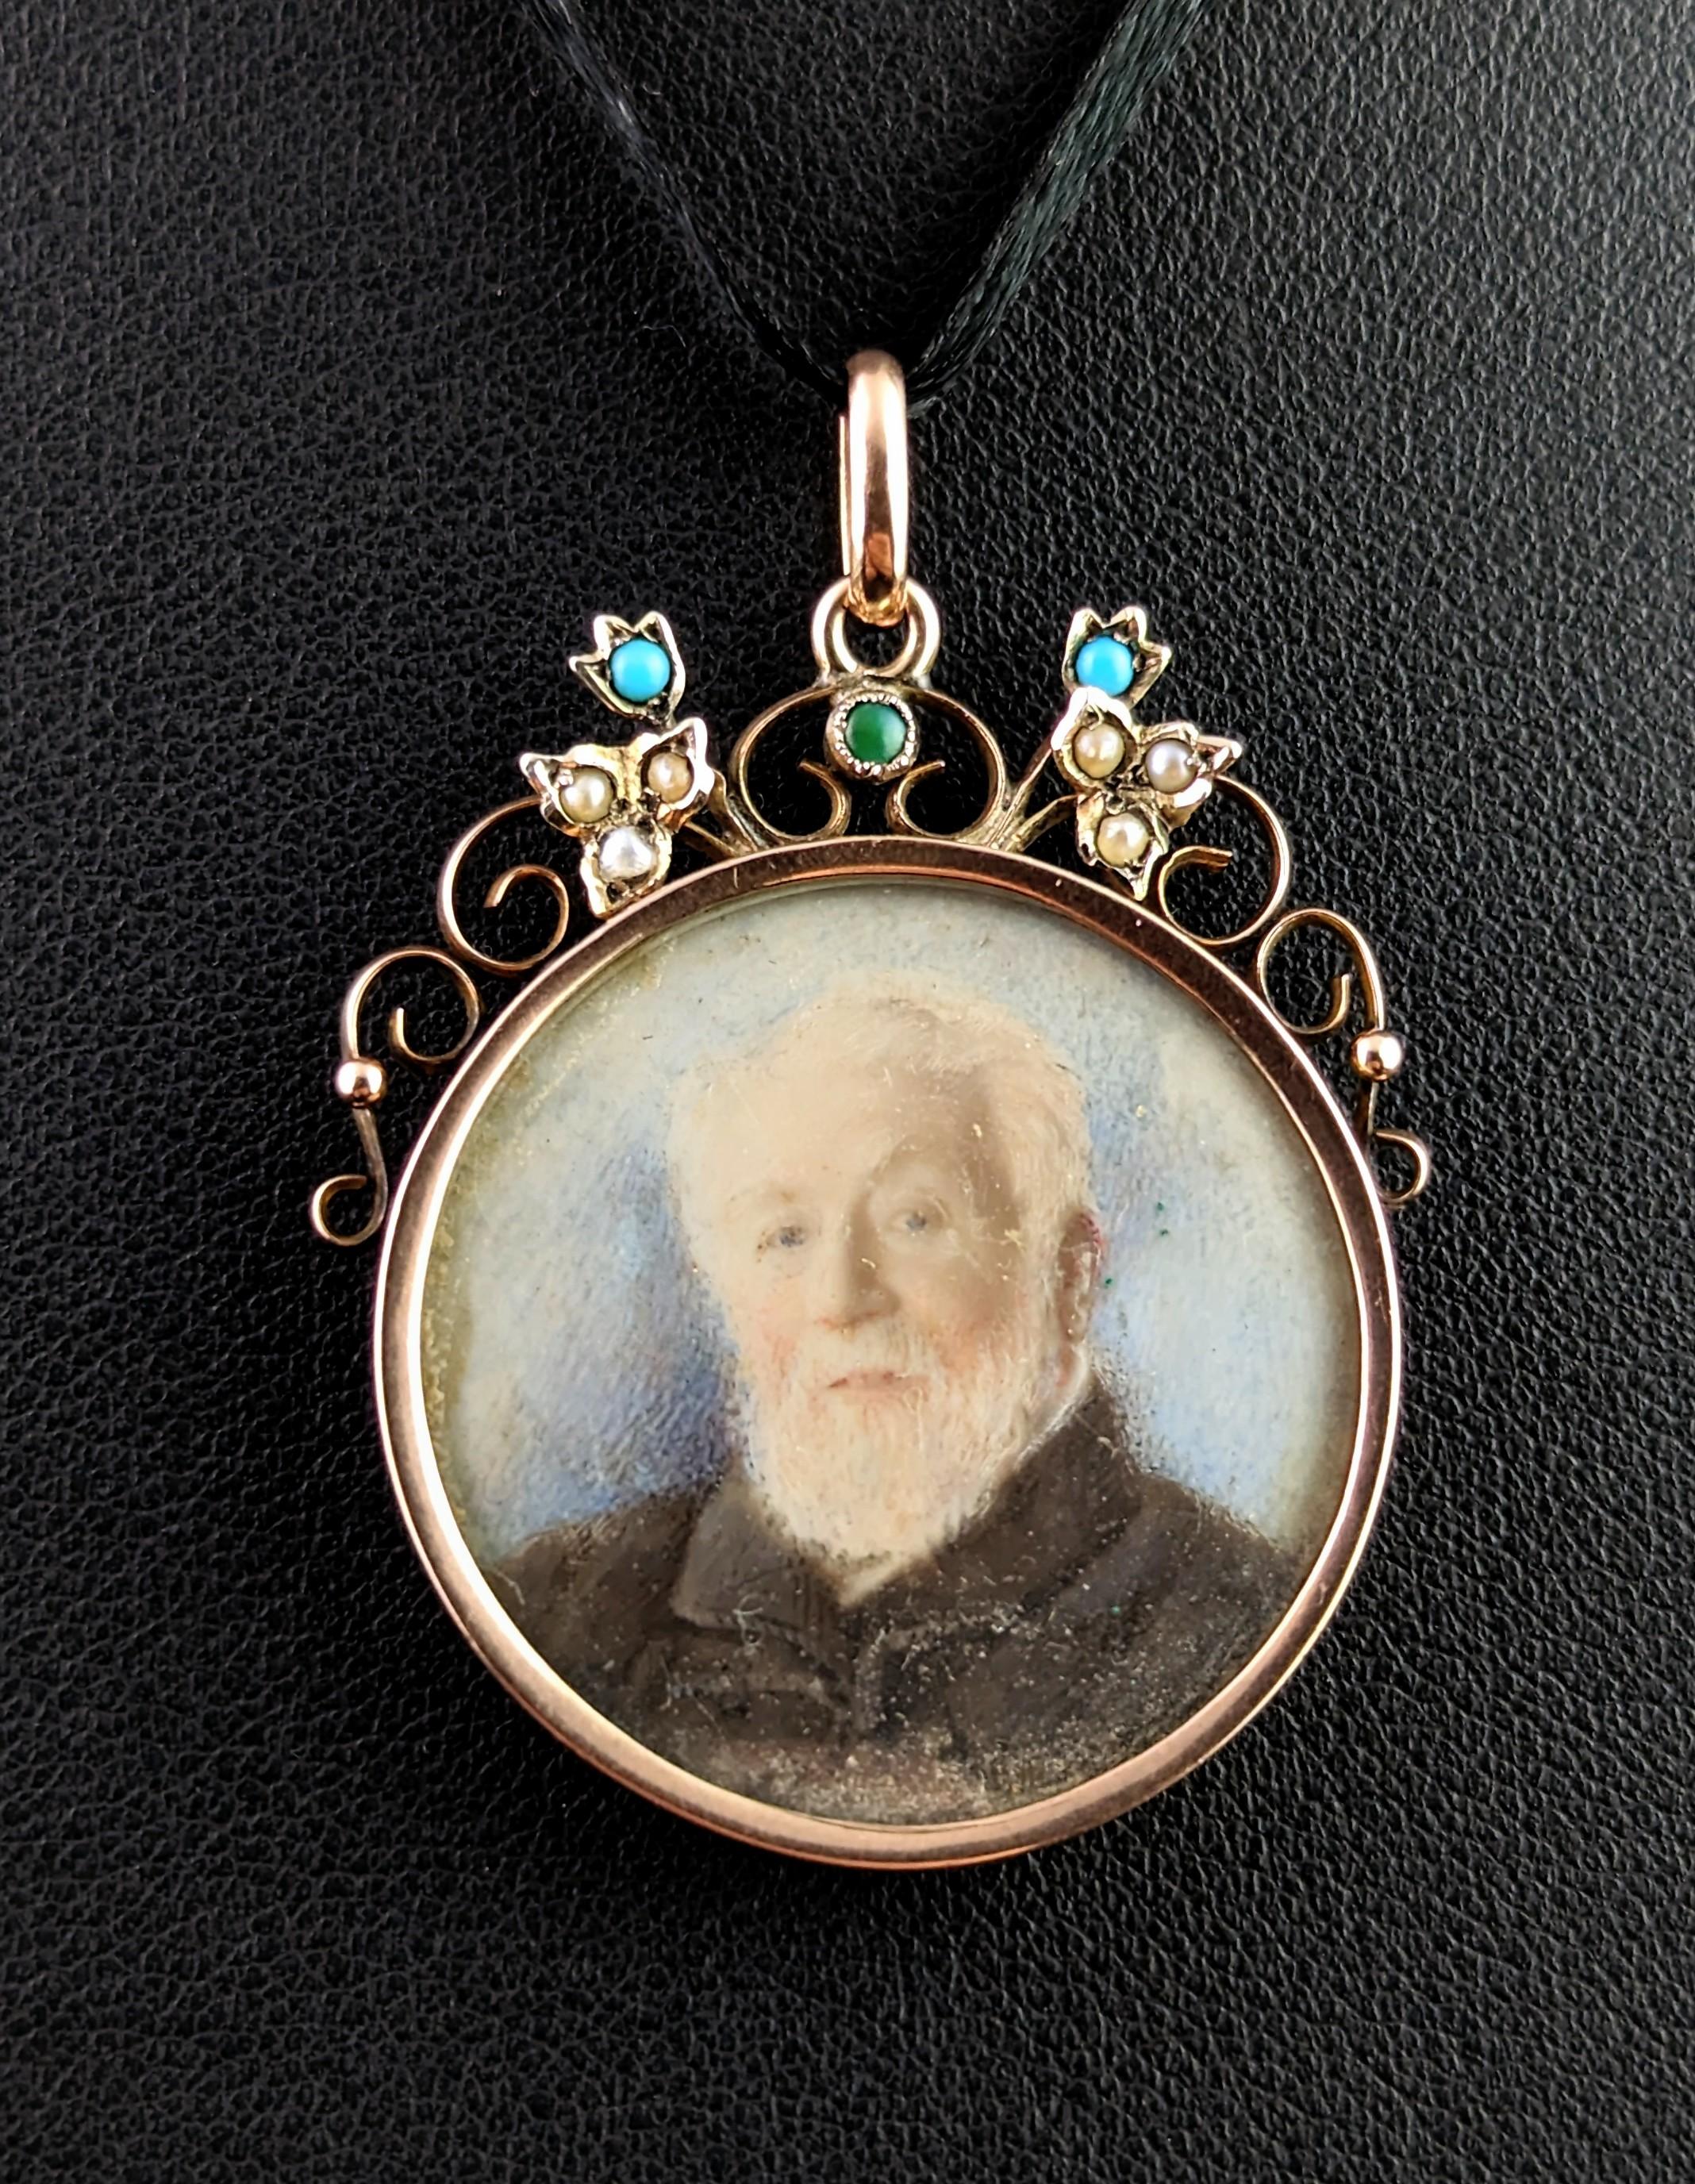 There is so much love and sentiment in this antique 9kt gold double sided locket pendant.

A Circular shaped locket with two glazed compartment sides, one containing a beautiful hand coloured portrait picture of a gentleman and the other containing